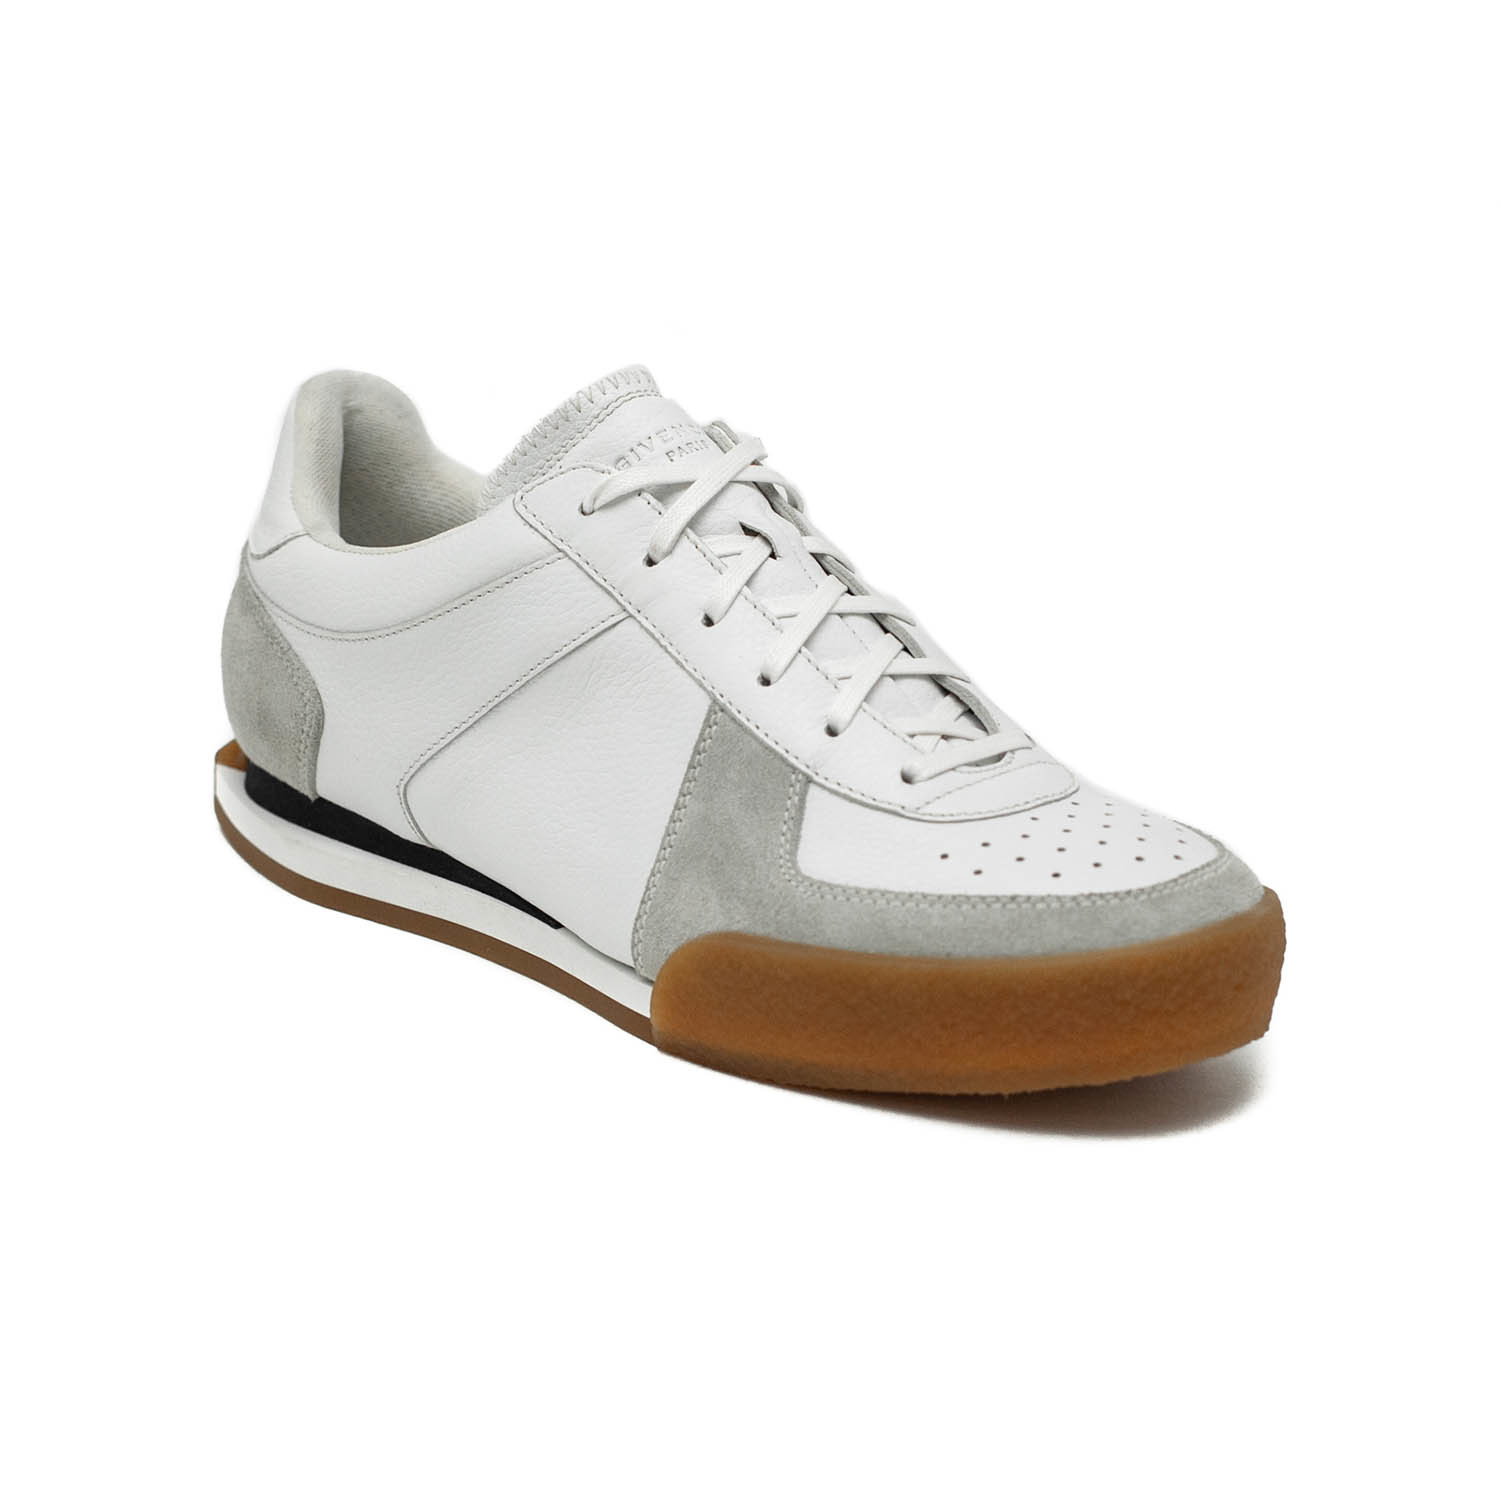 Givenchy // Men's Leather Set3 Tennis Sneaker Shoes // White (US: 6 ...